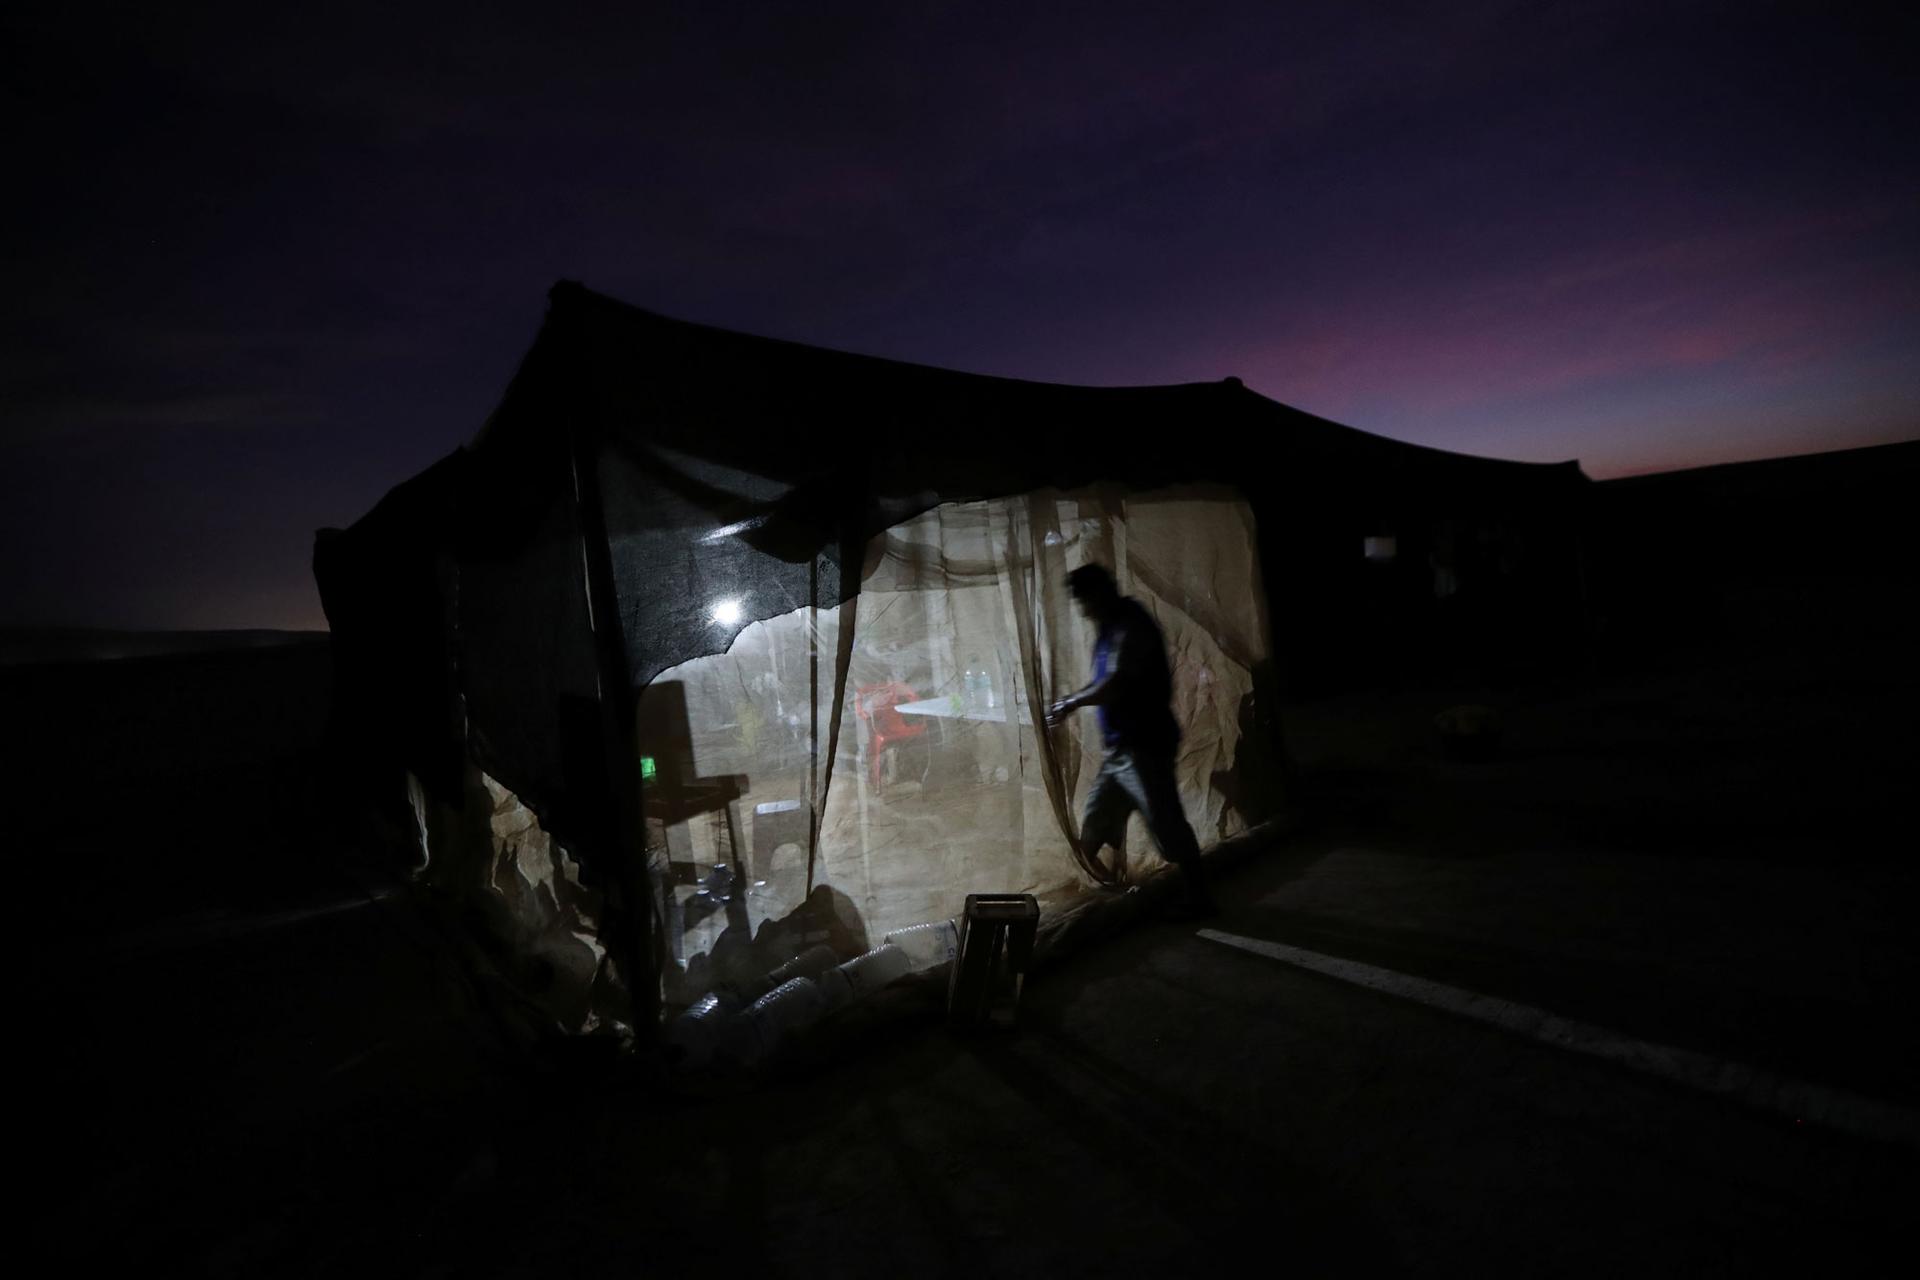 In this photo taken at night, a stand-up, mesh net-walled tent is shown lit from the inside.